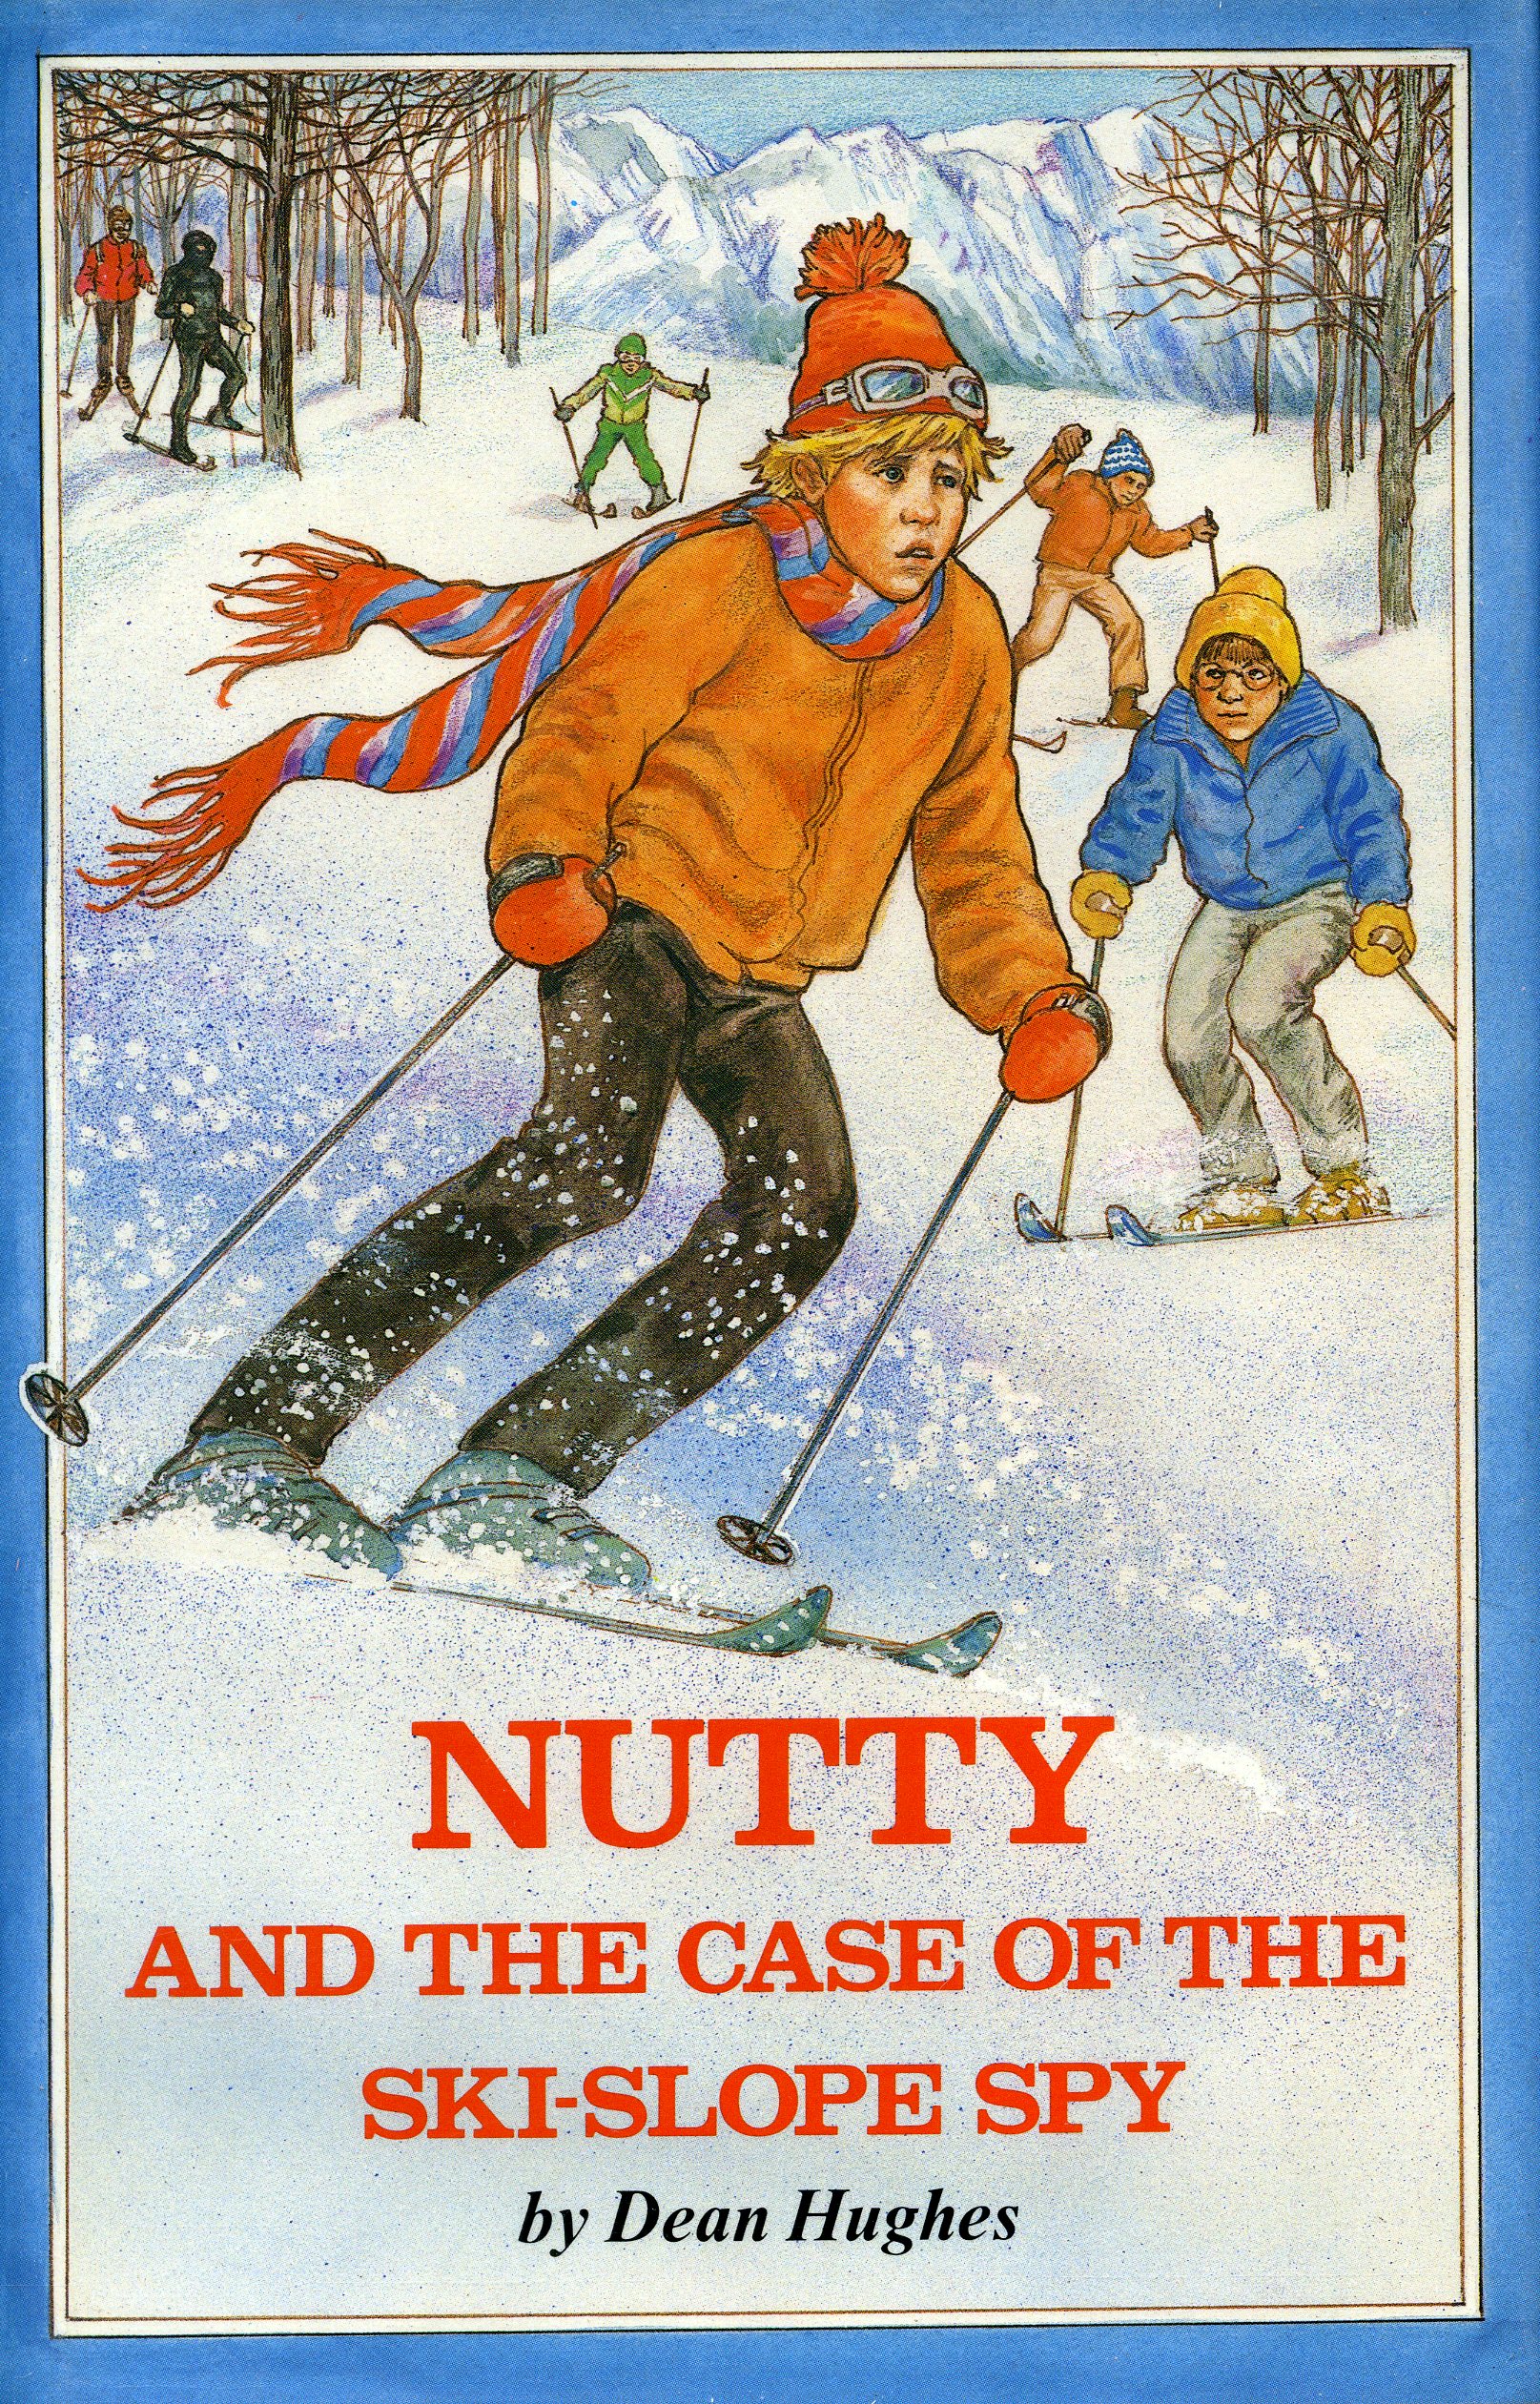 Nutty and the Case of the Ski-Slope Spy by Dean Hughes